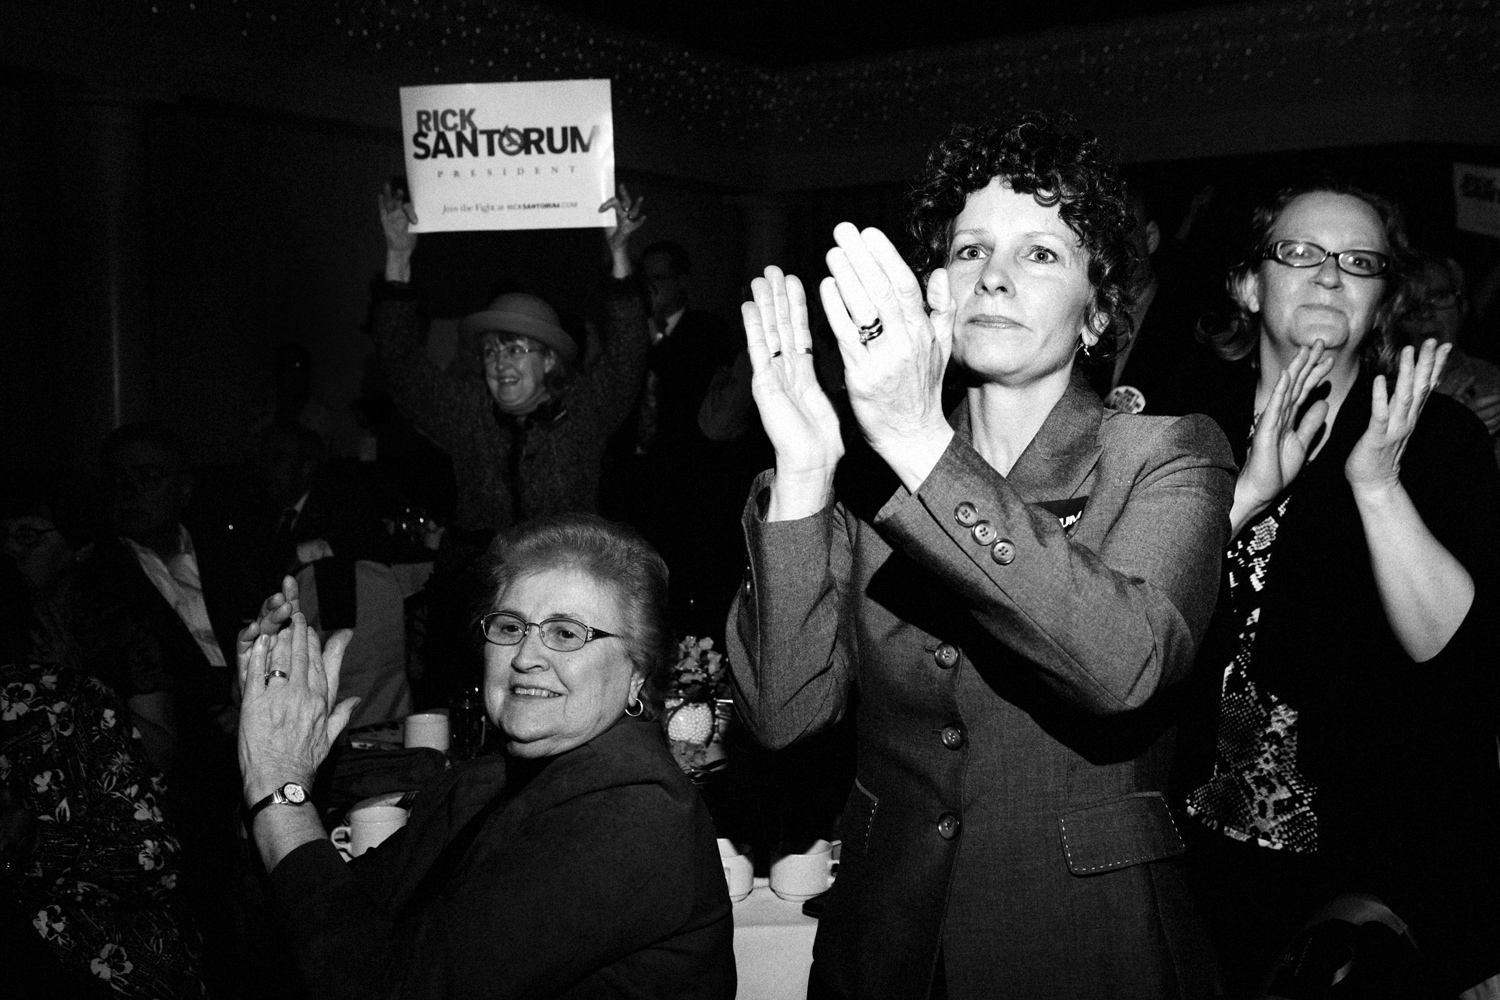 March 2, 2012. Rick Santorum supporters applaud his speech at a Lake County Republican Party event in Willoughby, Ohio.